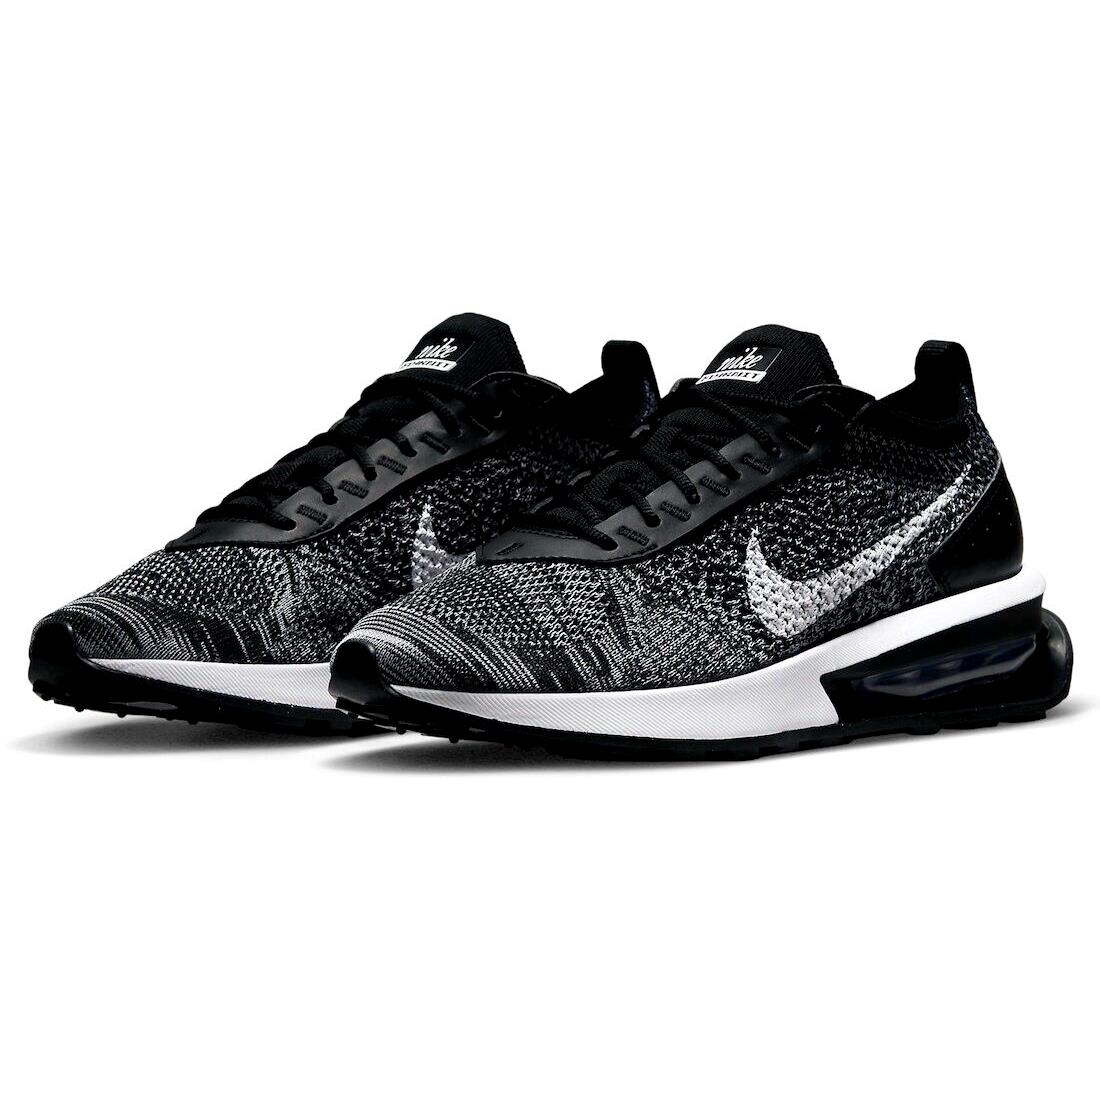 Nike Air Max Flyknit Racer Mens Size 9 Shoes DM9073 001 Black White